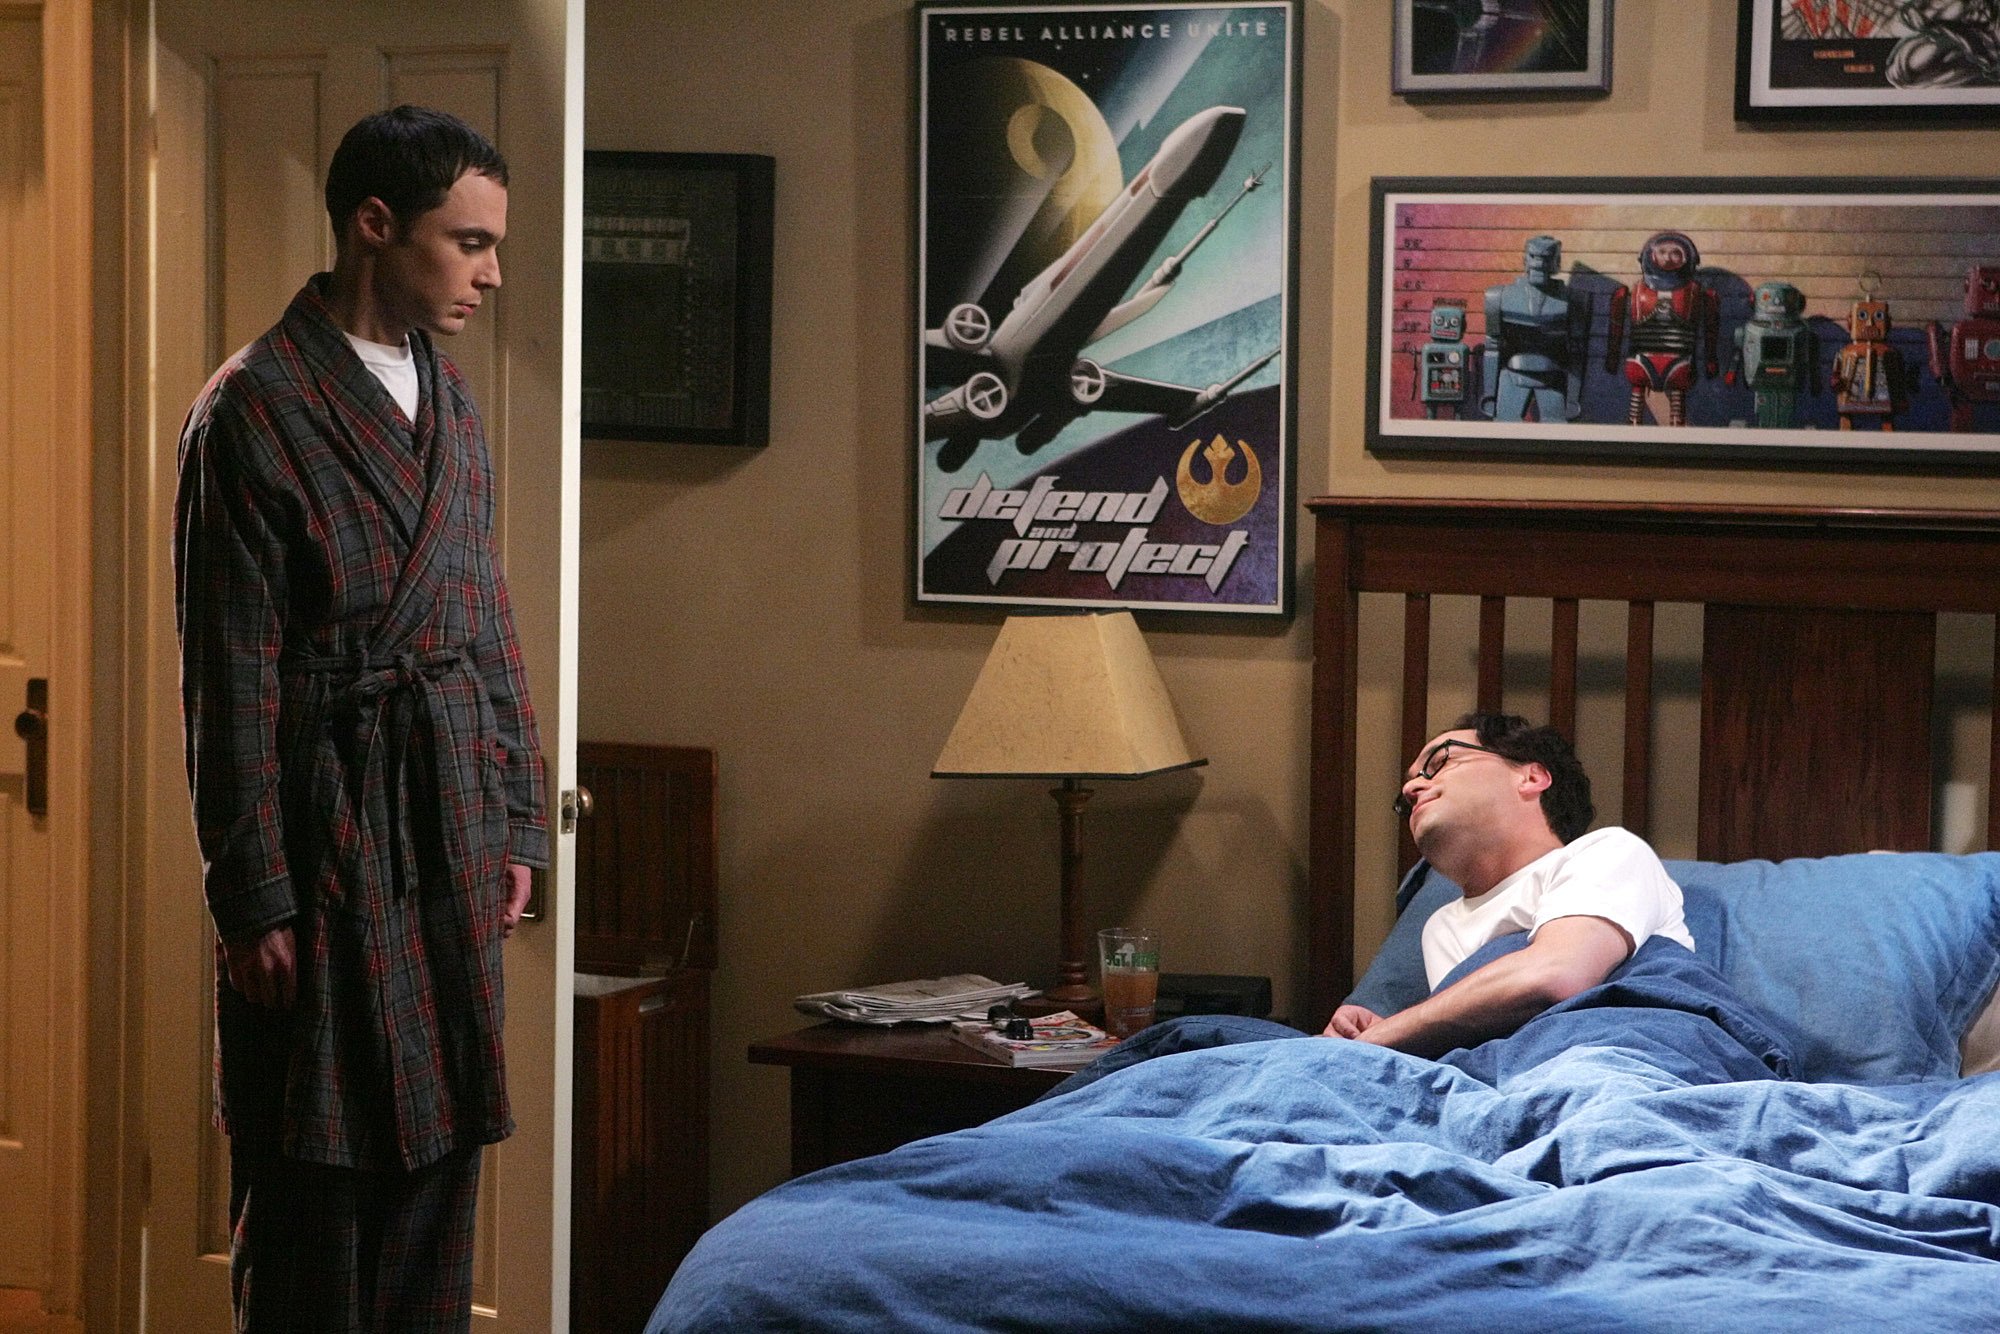 Sheldon Cooper approaches Leonard Hofstadter in his bedroom on an episode of 'The Big Bang Theory'